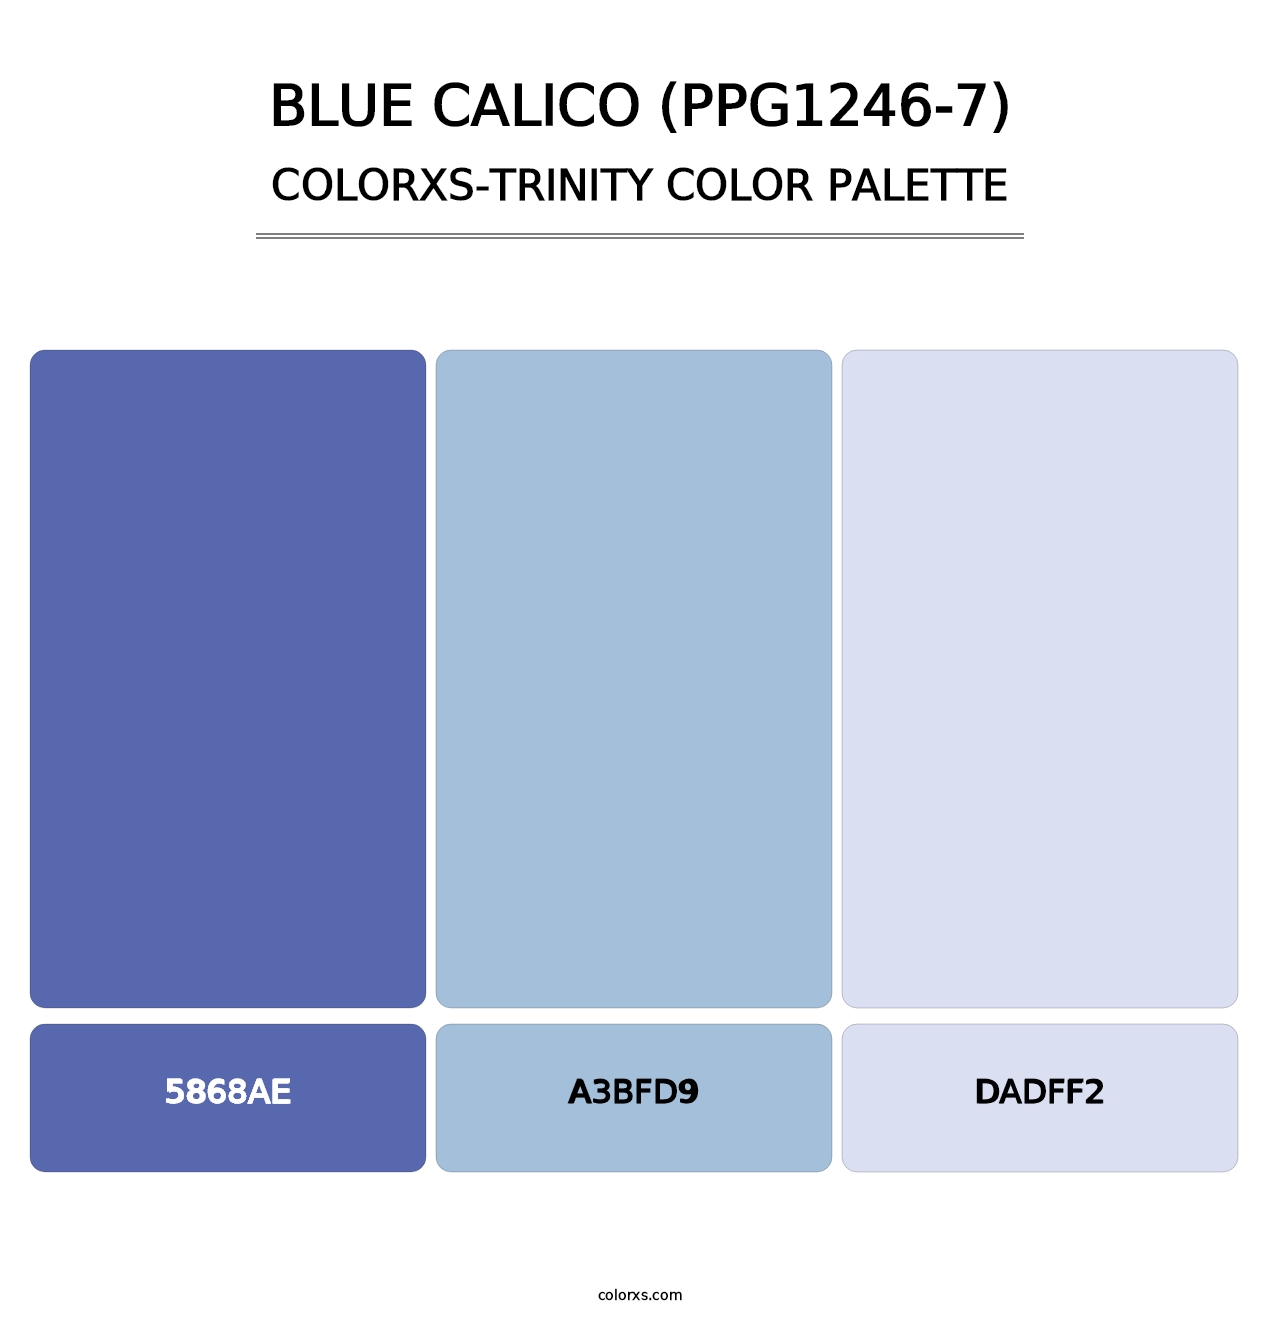 Blue Calico (PPG1246-7) - Colorxs Trinity Palette